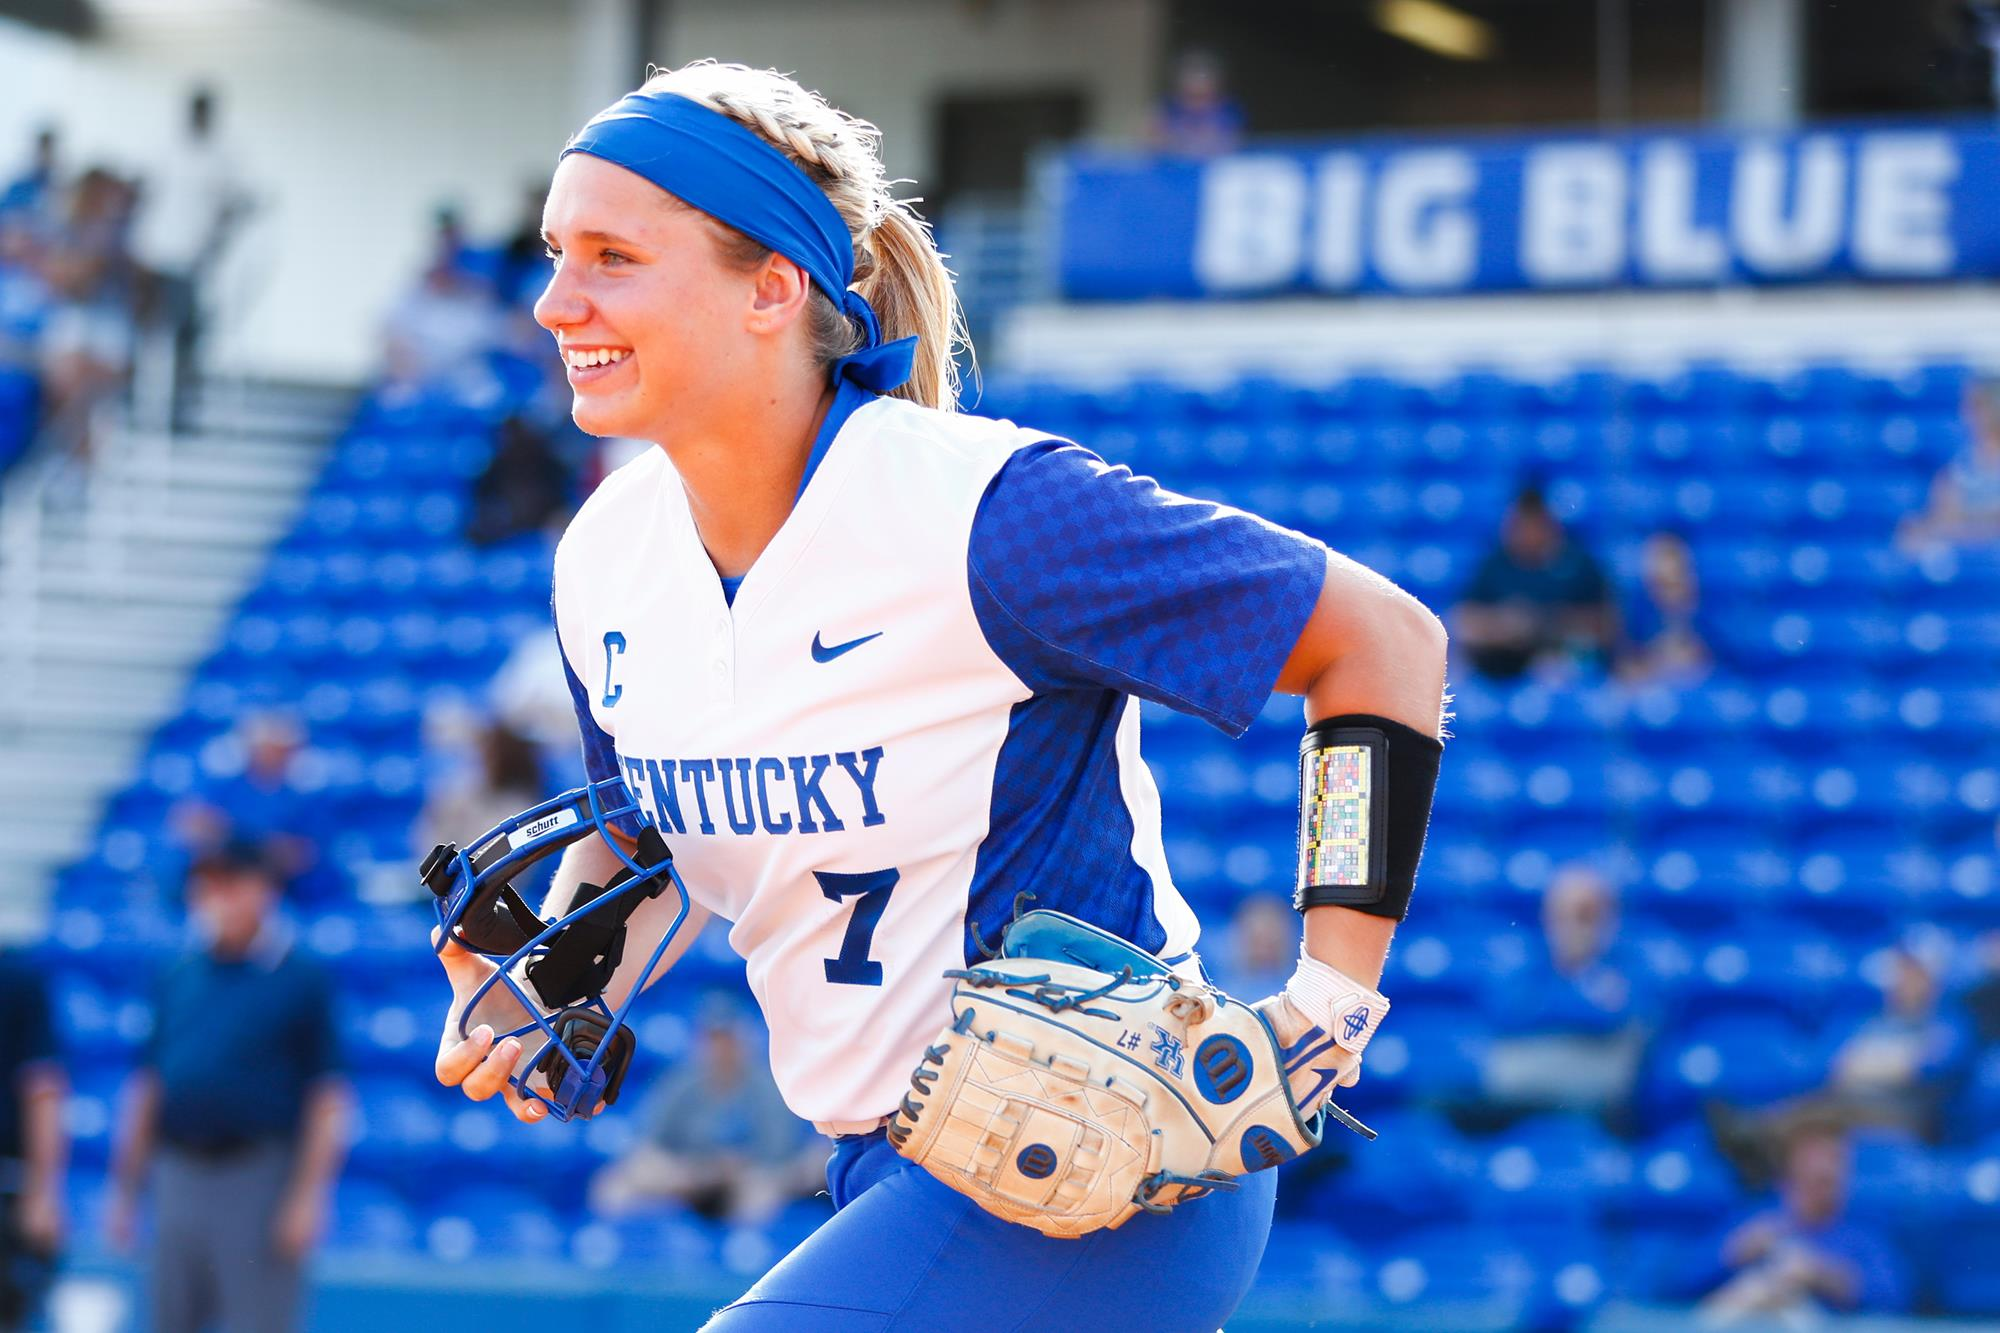 Humes Powers No. 23 UK to 13-Inning Win Over No. 3 Alabama